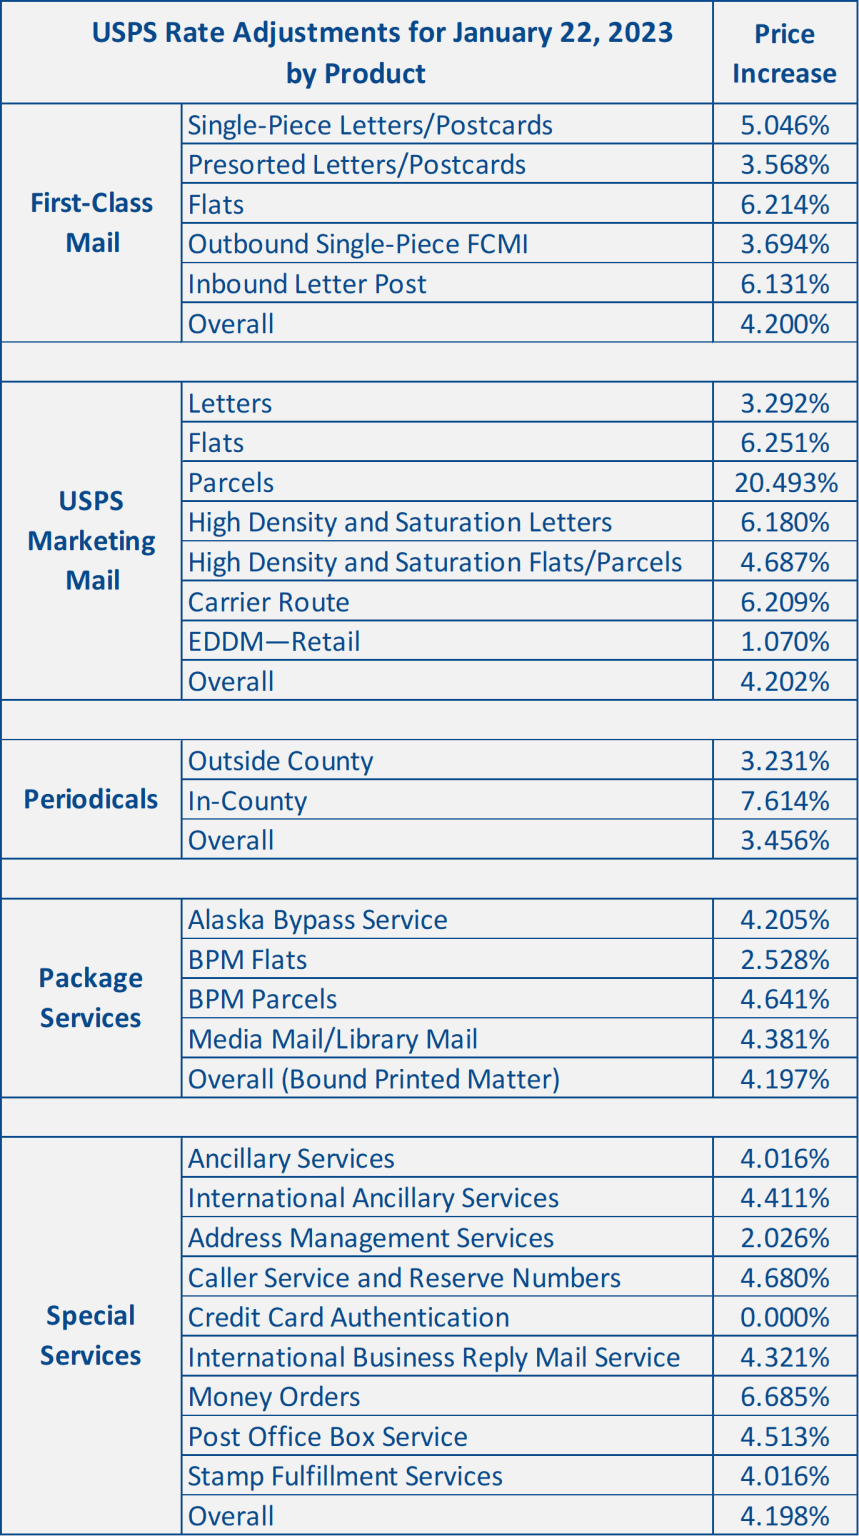 PRC Approves USPS Pricing Increases for Jan. 22, 2023 Walsworth